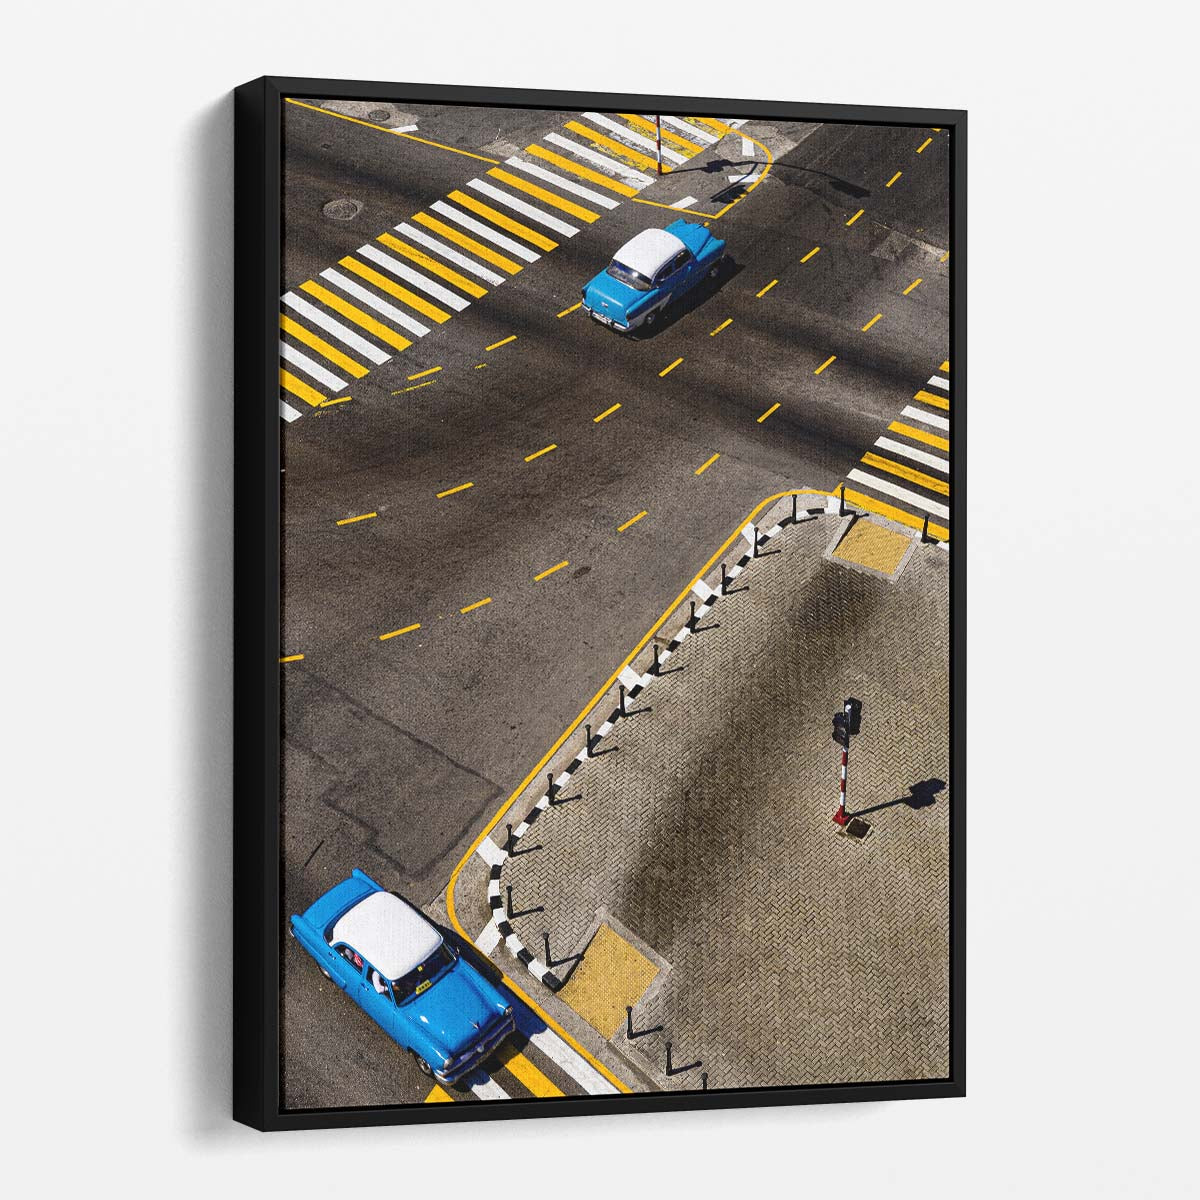 Vintage Havana Street Photography Classic Cars & Colorful Crosswalk Aerial View by Luxuriance Designs, made in USA